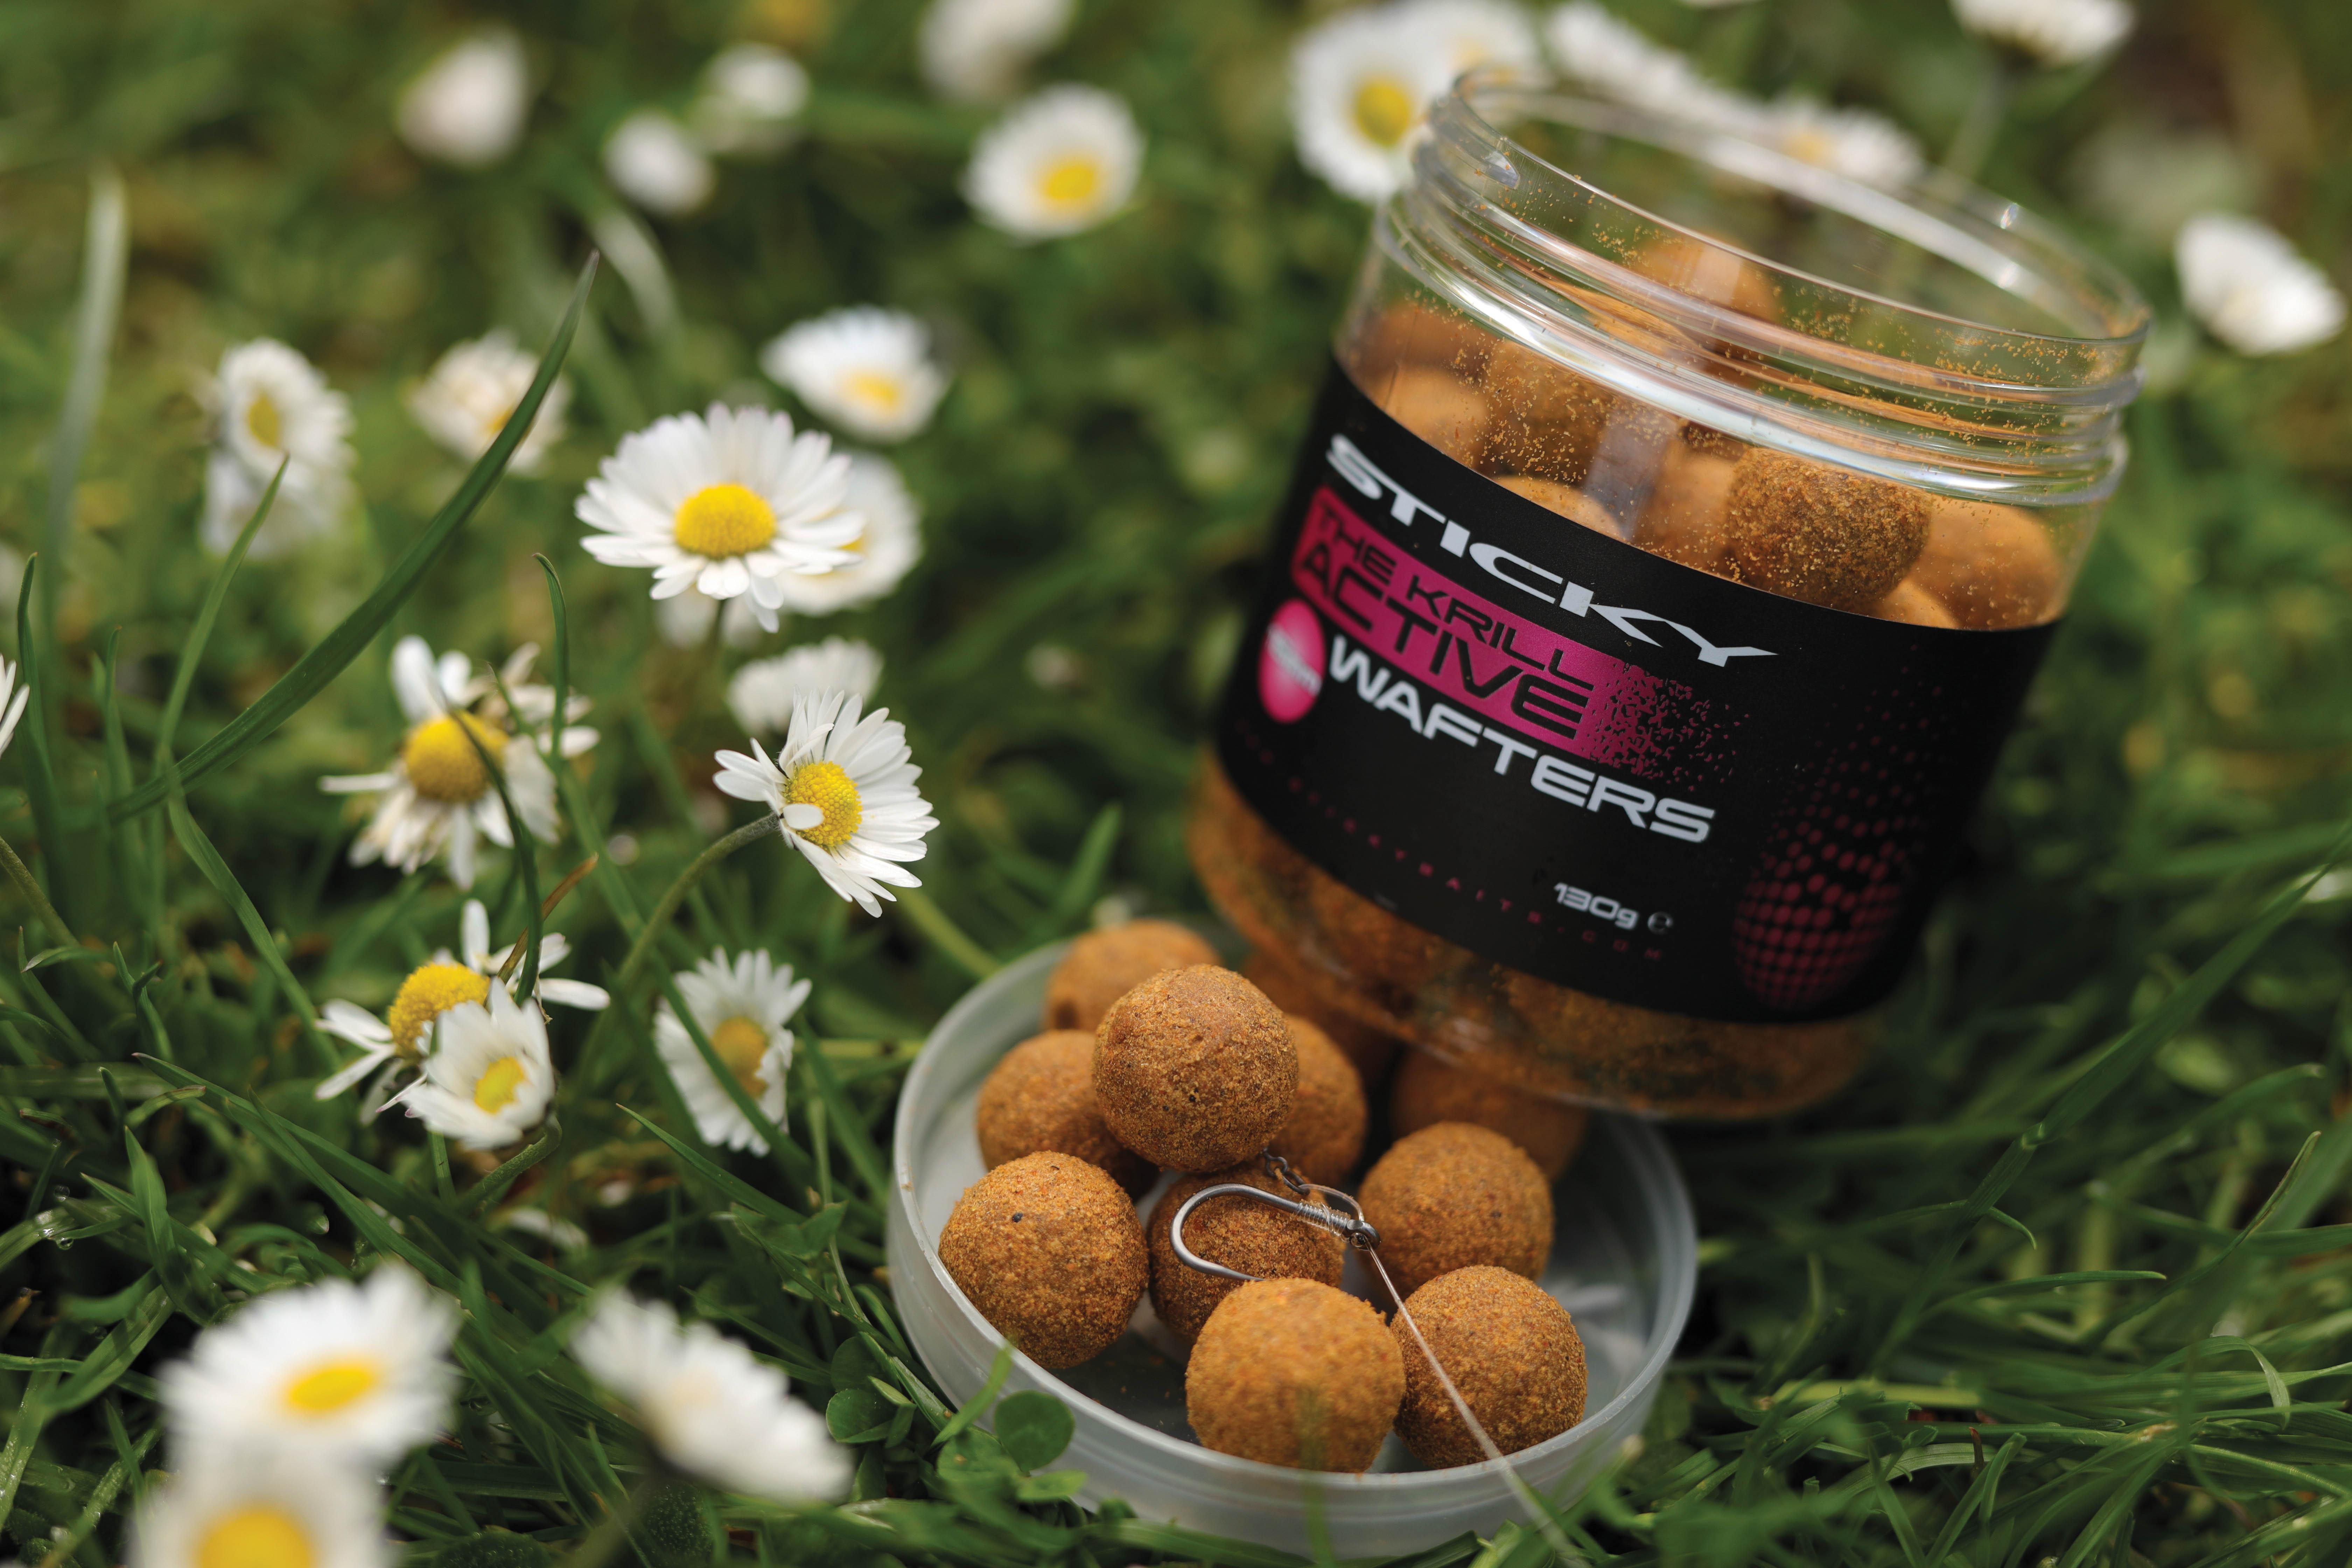 STICKY BAITS MANILLA WAFTERS TASTER PACKS of 12-16mm BOILIES 